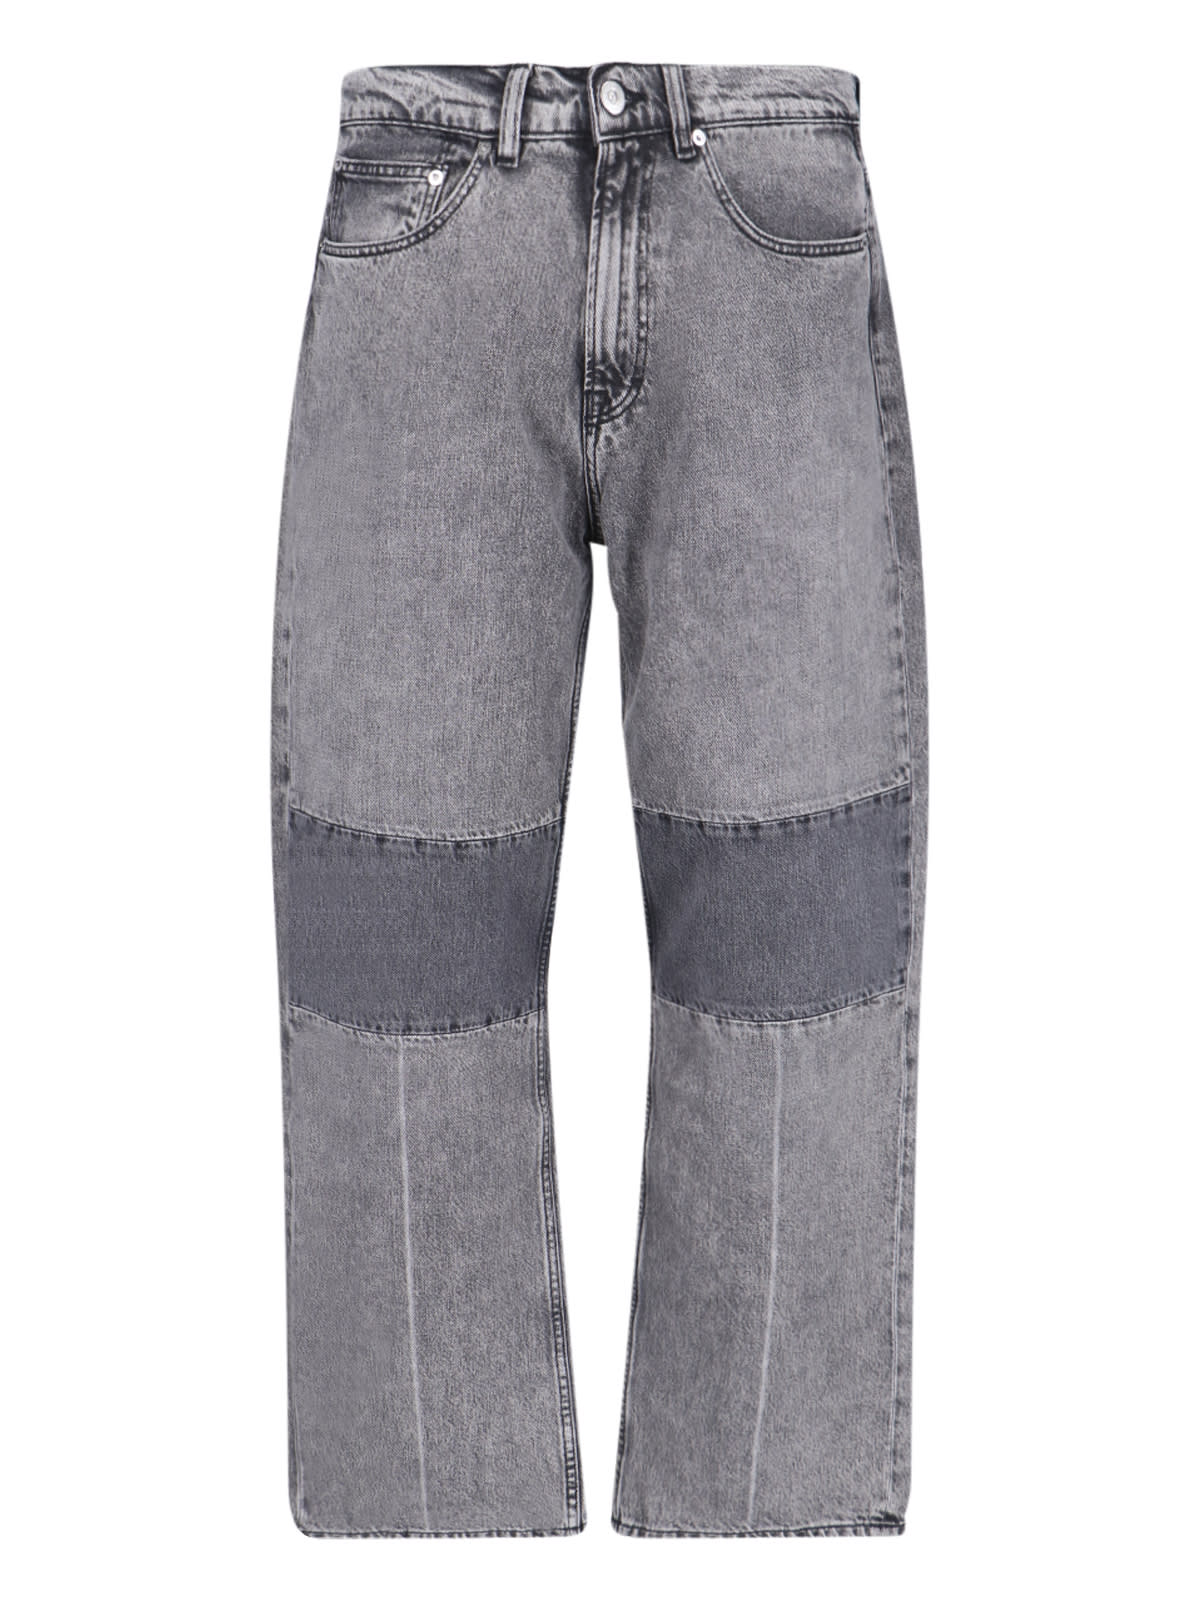 Shop Our Legacy Extended Third Cut Jeans In Gray